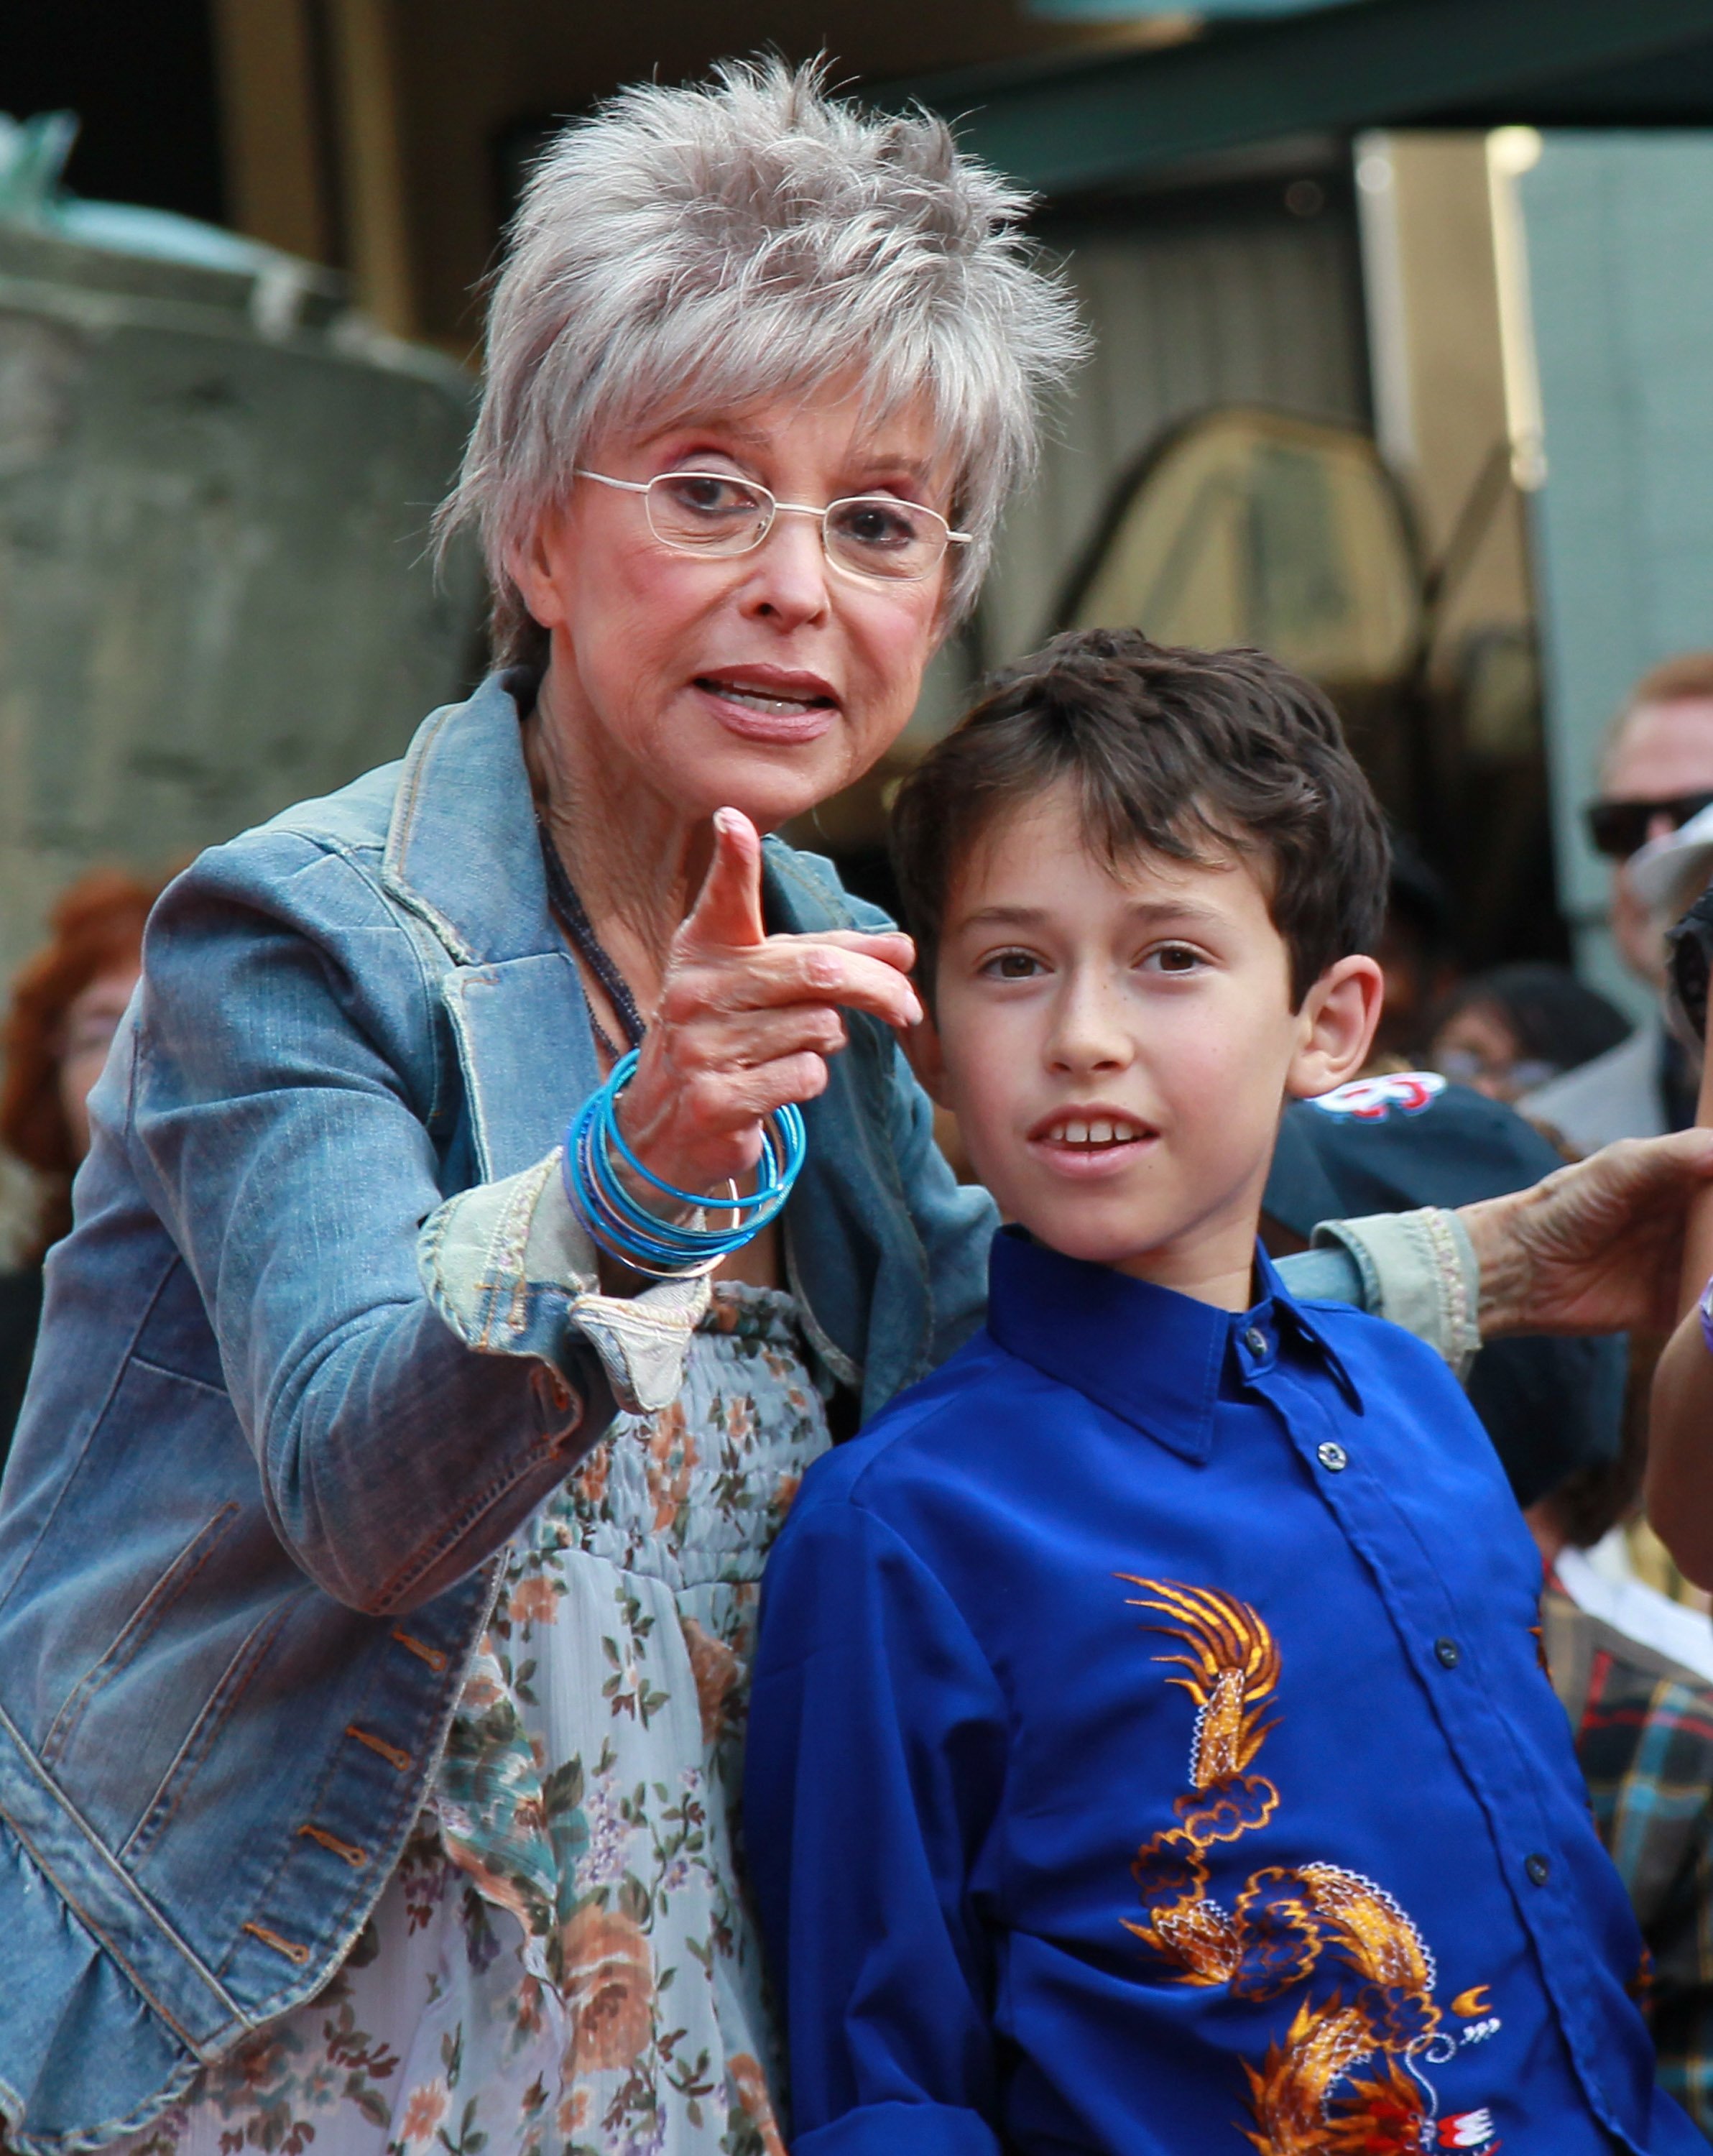 Rita Moreno and Cameron Fisher at the hand and footprint ceremony celebrating "West Side Story" at Grauman's Chinese Theatre in Hollywood, California, on November 15, 2011. | Source: Getty Images 